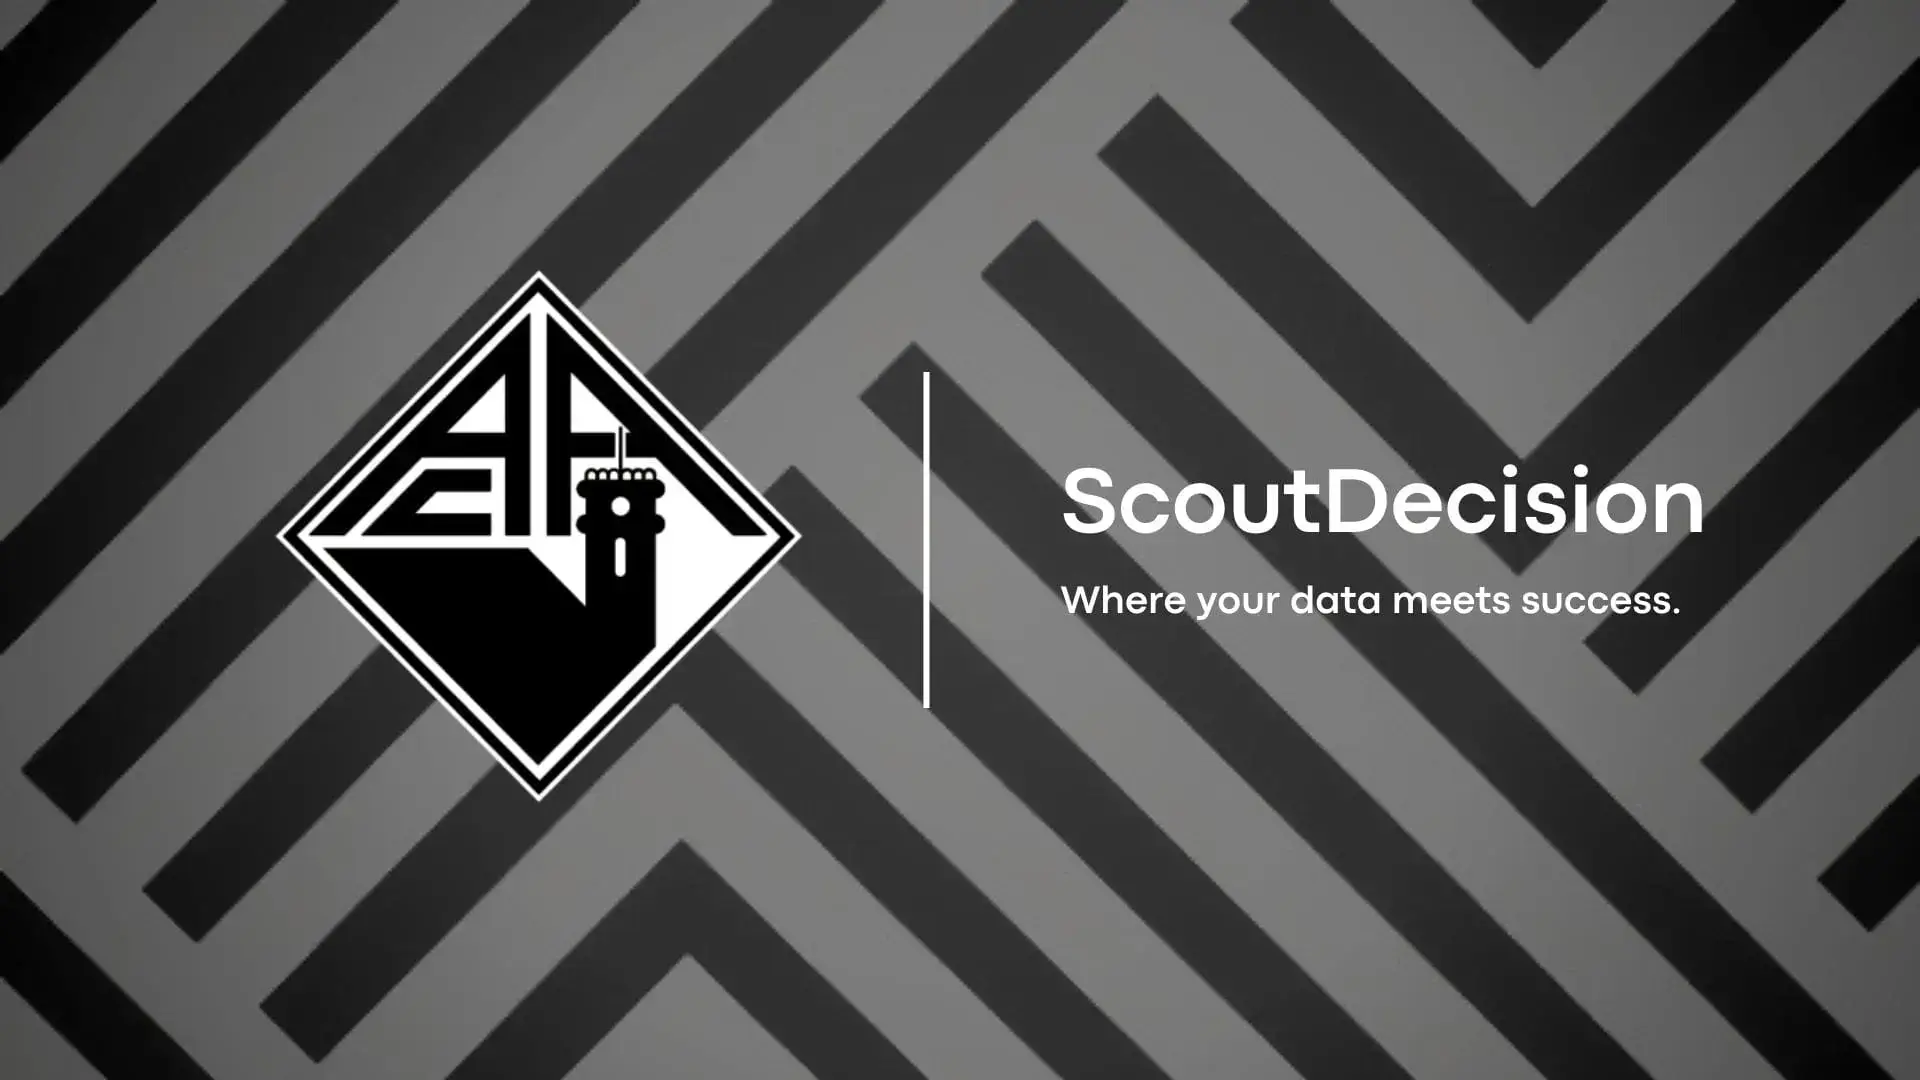 ScoutDecision agrees with Historic Portuguese Club